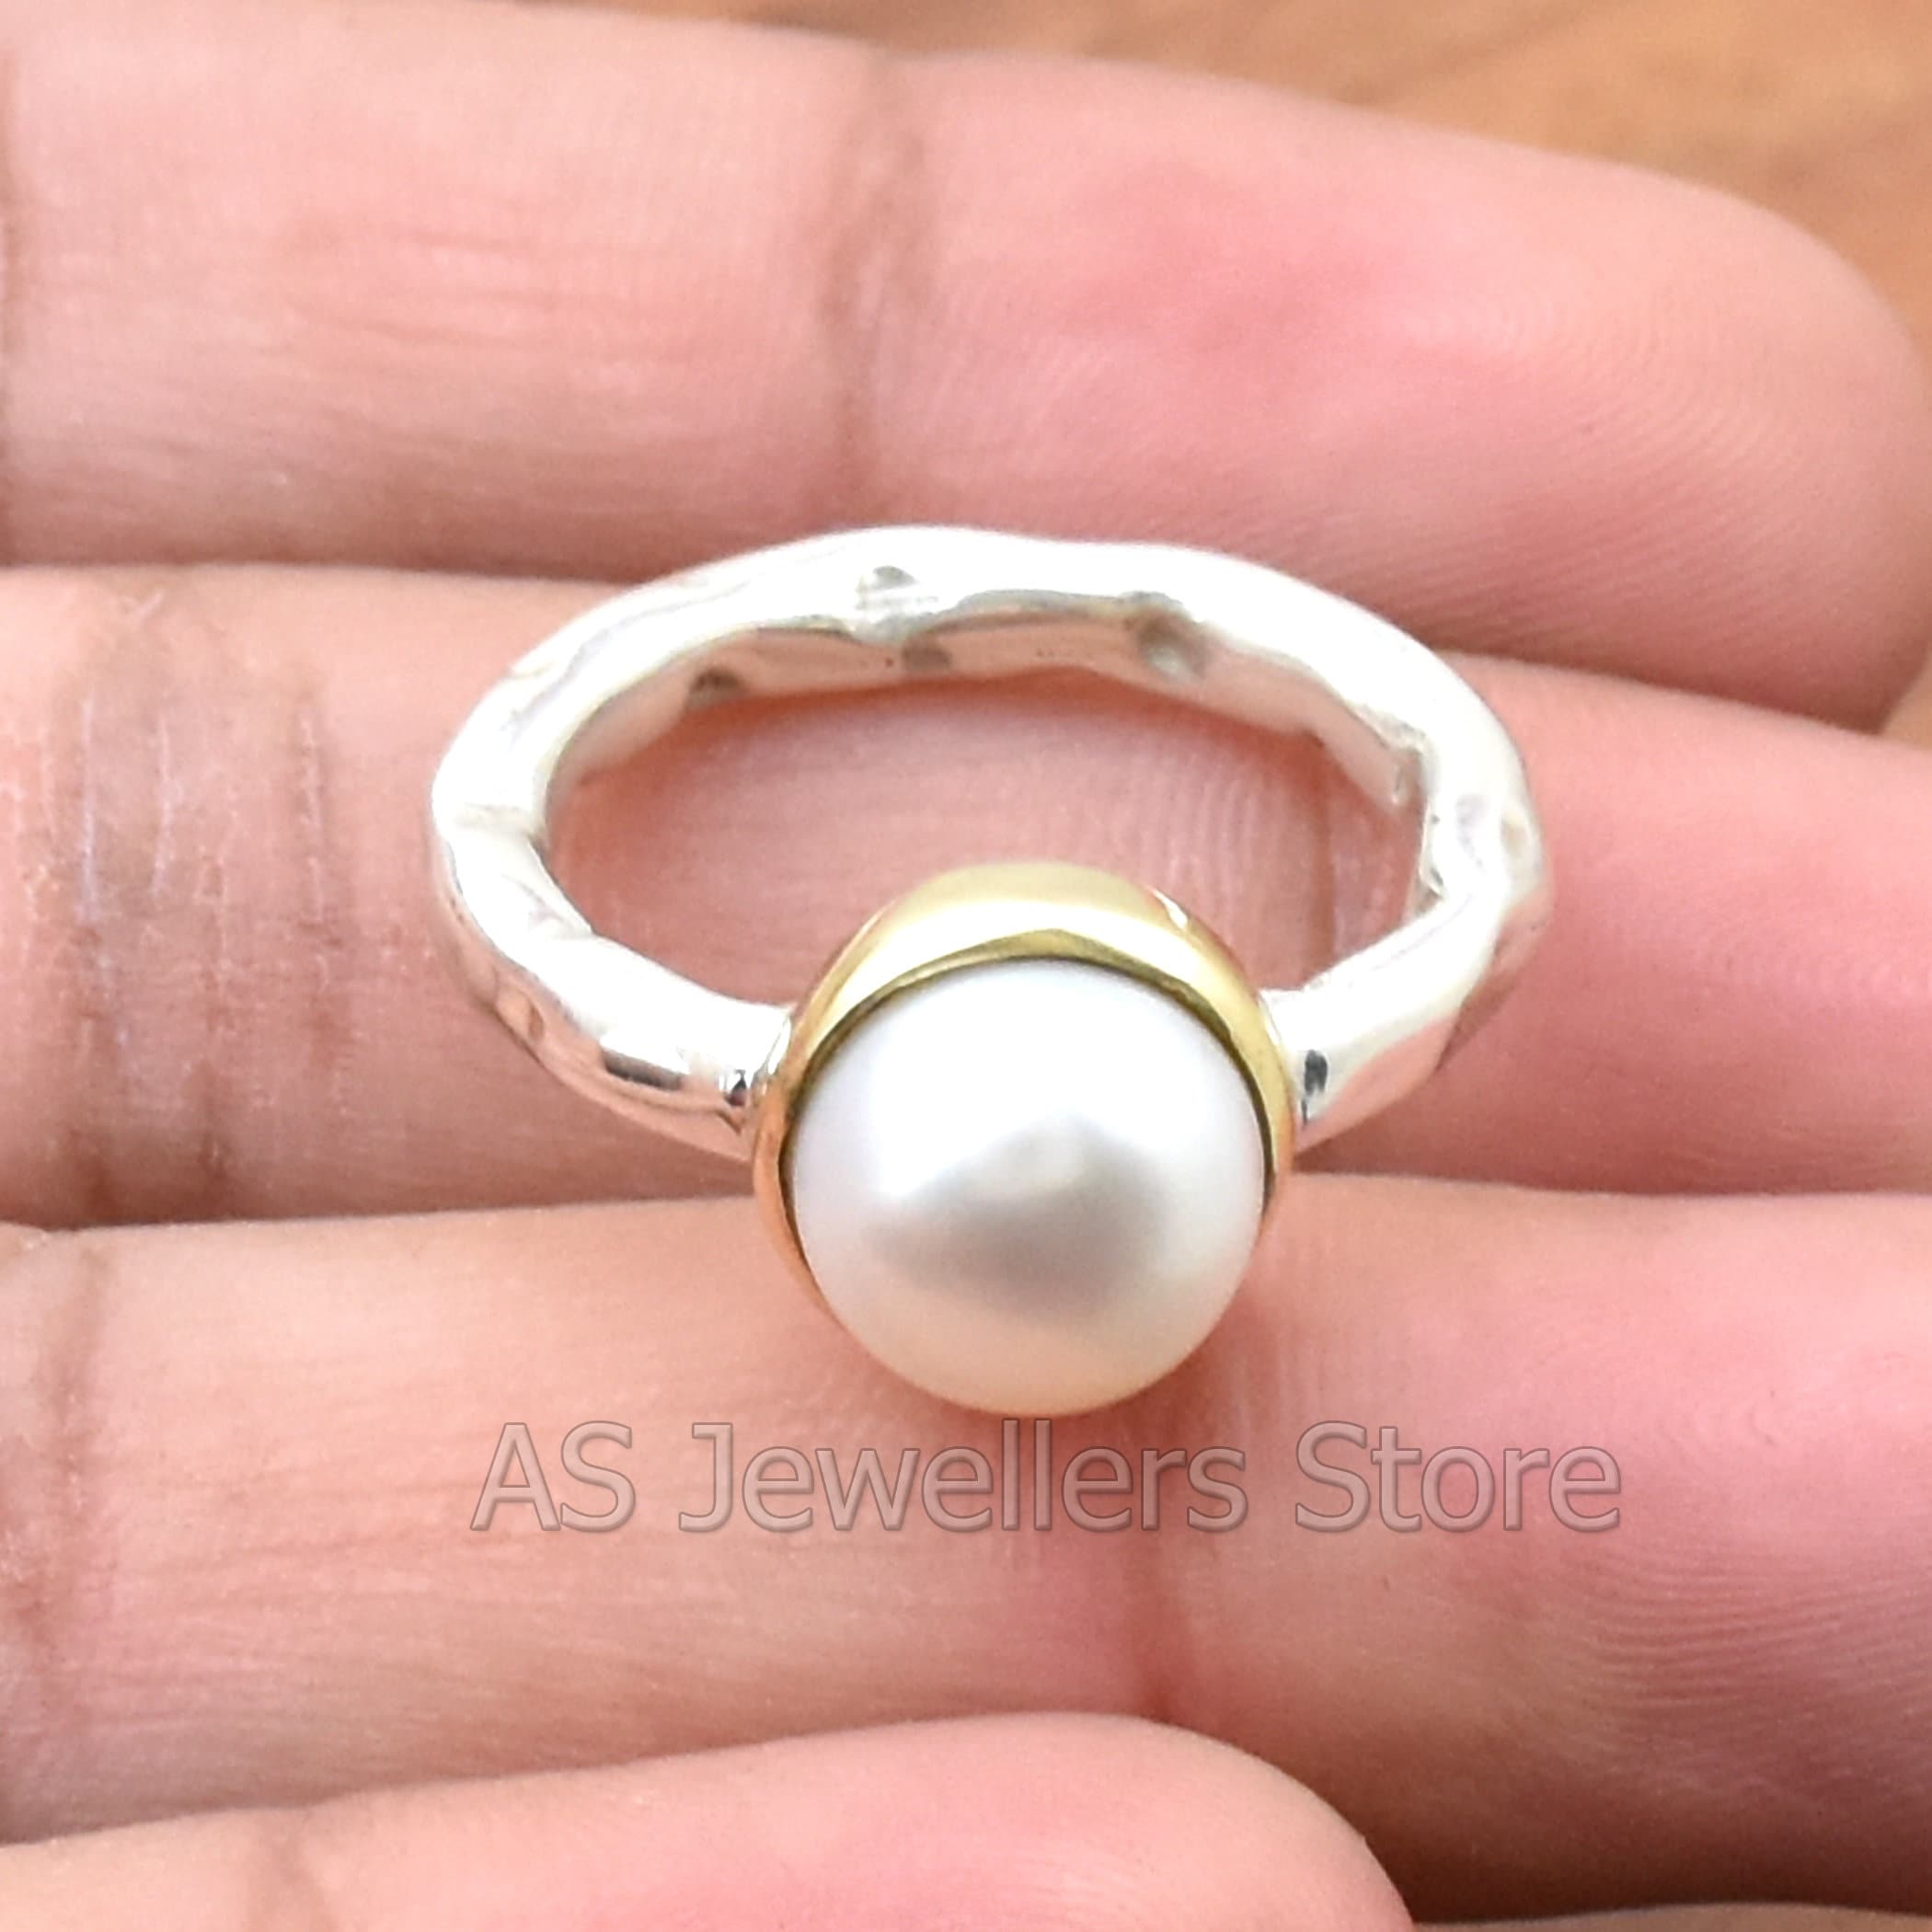 Pearl dot ring - Toby Eagle Jewellery